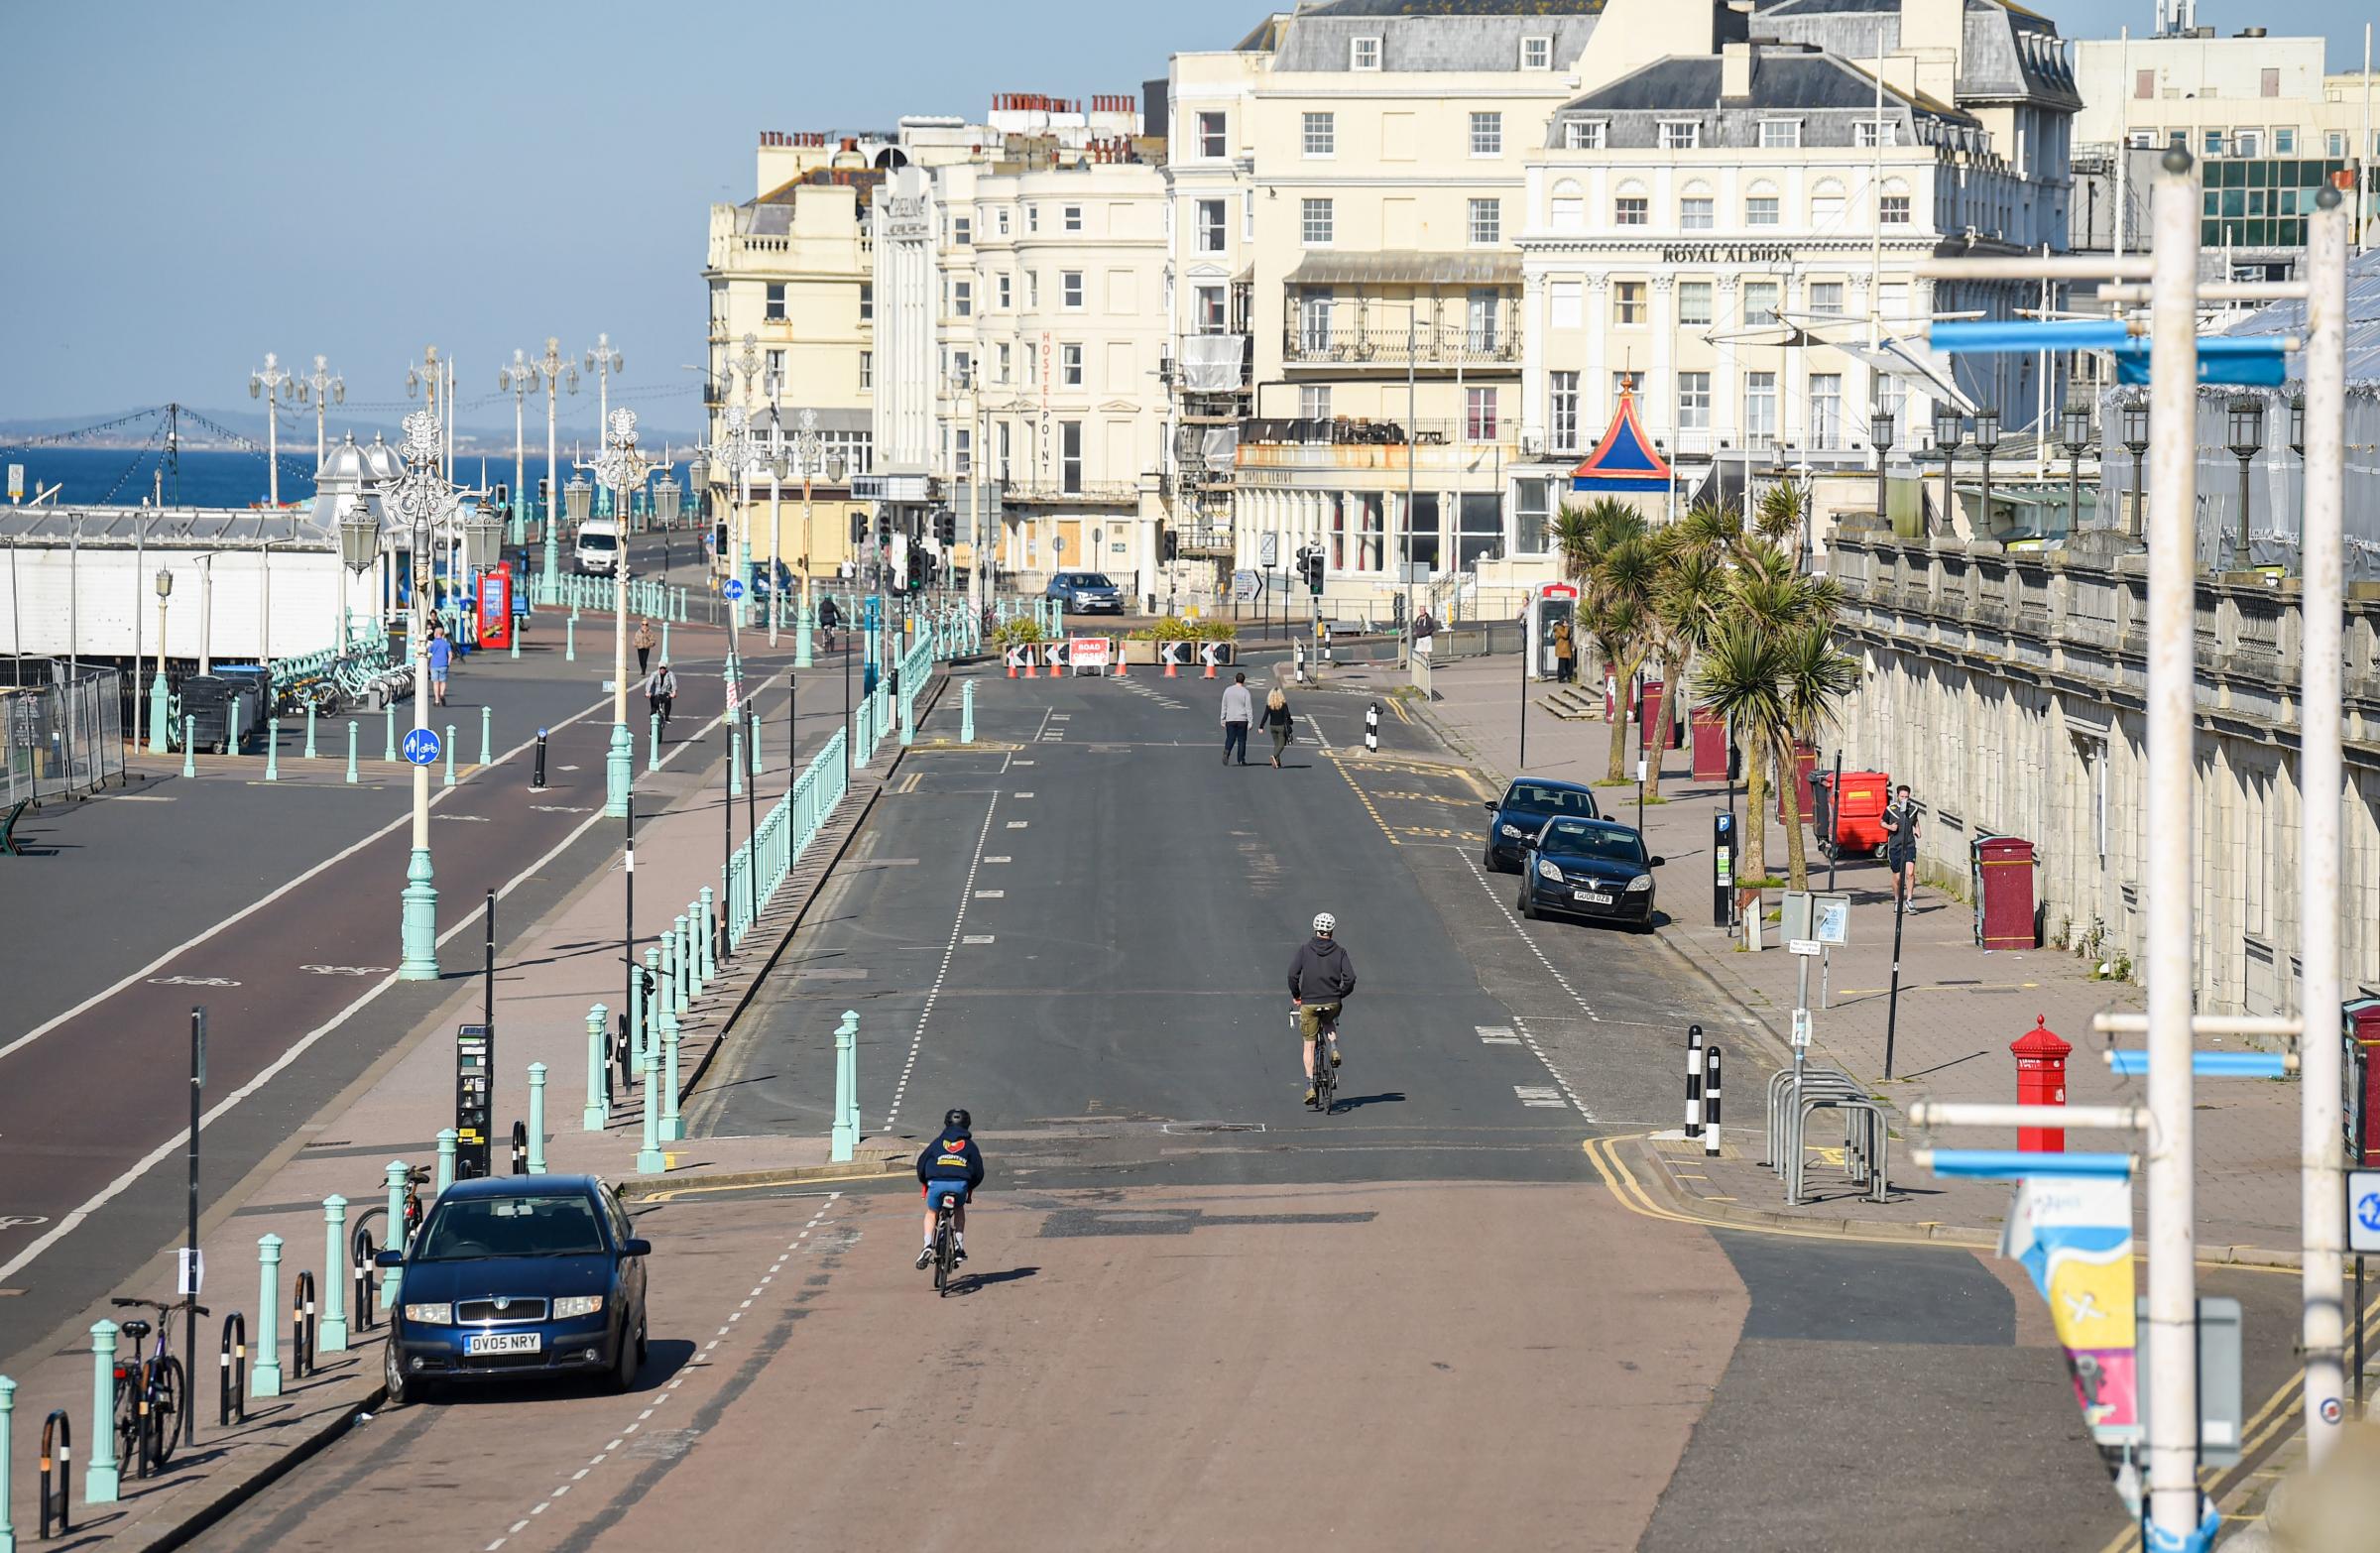 Brighton UK 20th April 2020 - Madeira Drive on Brighton seafront has been closed by the city council to traffic between 8am and 8pm for the next three weeks to allow cyclists and pedestrians to exercise in safer conditions during the Coronavirus